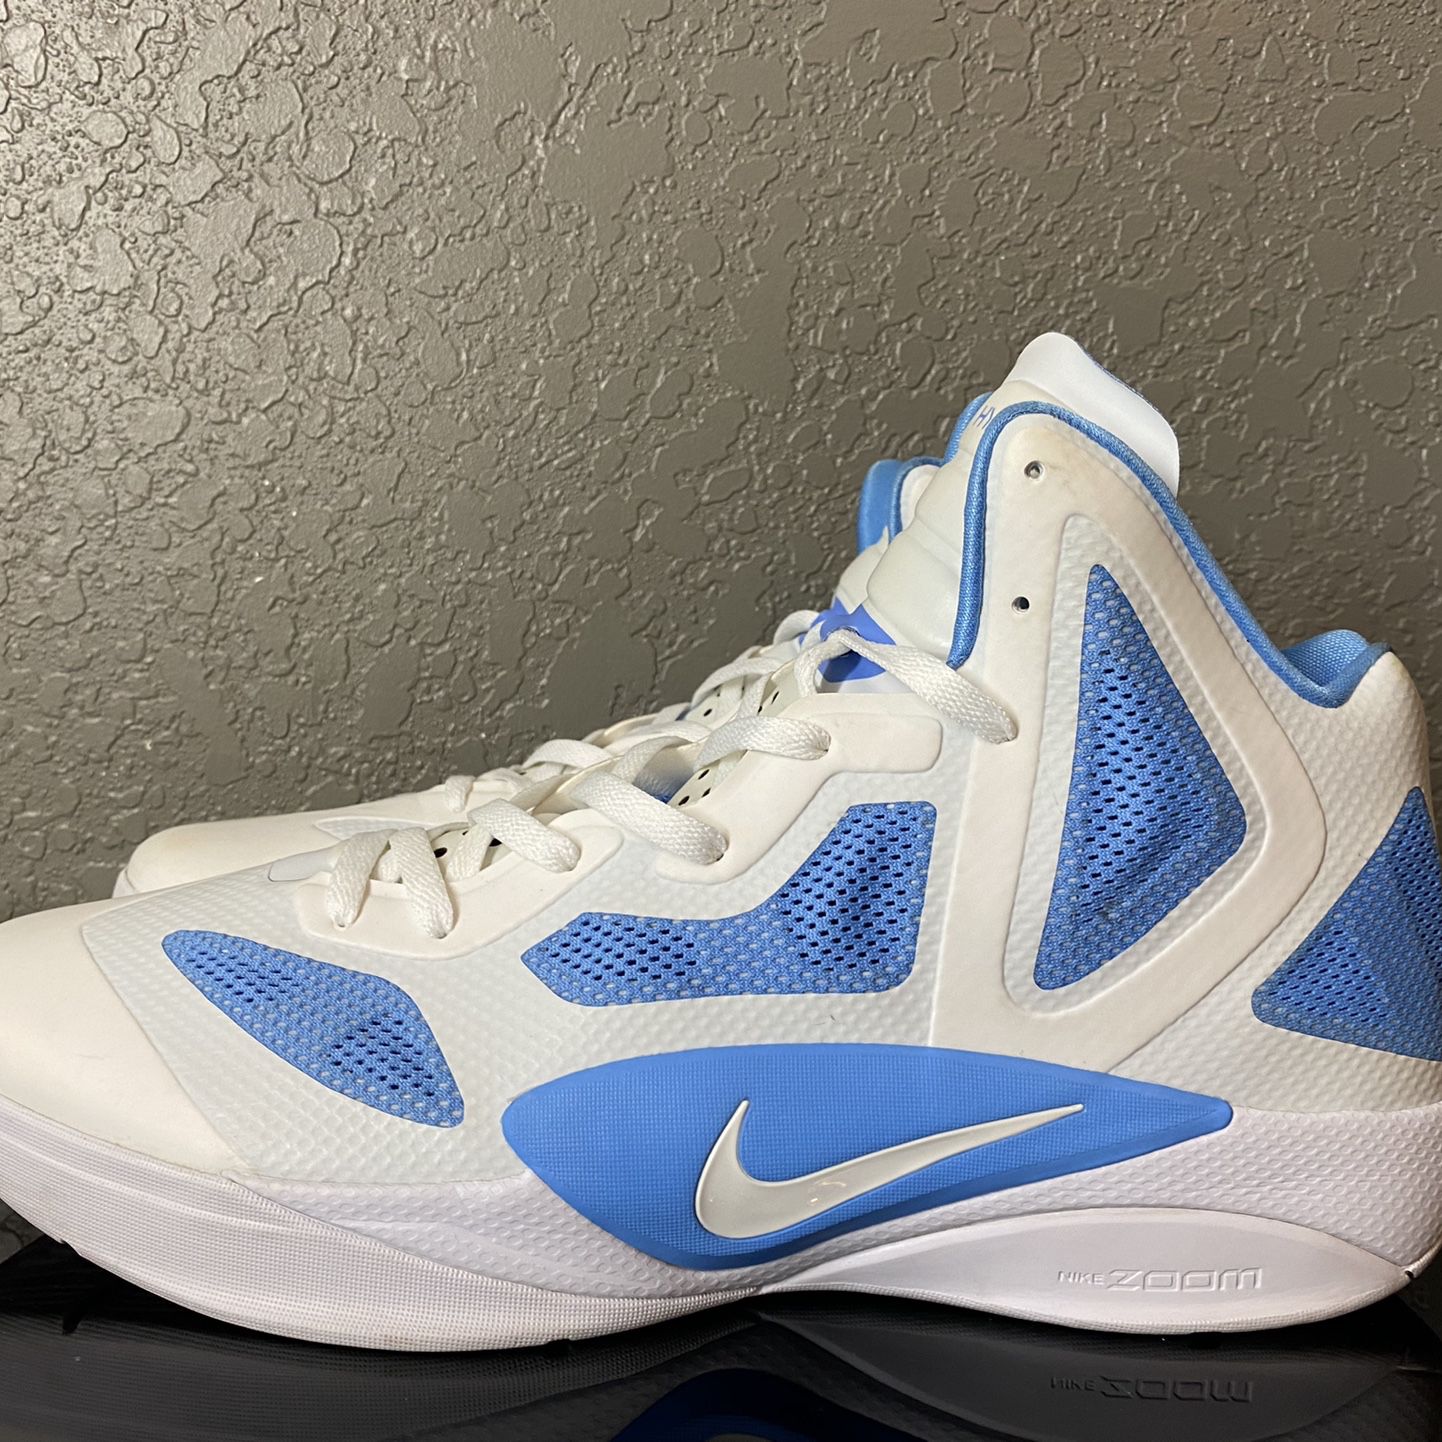 Convertir necesidad Allí NIKE ZOOM HYPERFUSE 2011 TB Men's Size 17 White/ Varsity Blue BasketBall  Shoes for Sale in San Antonio, TX - OfferUp